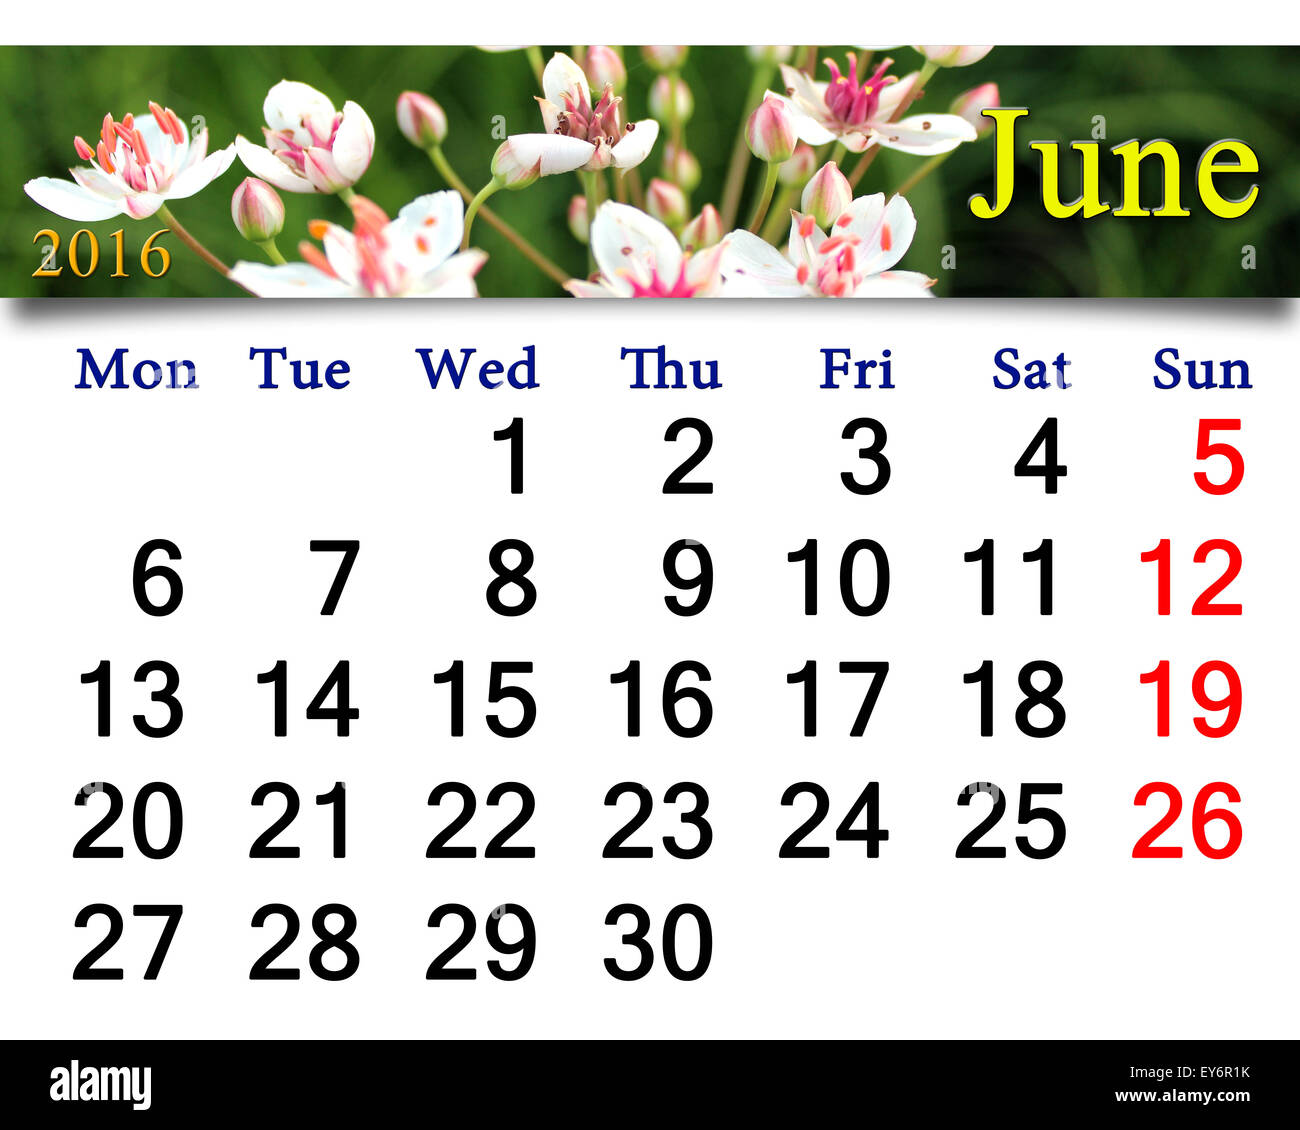 Calendar For June 16 With Pink And White Flowers Of Butomus Umbellatus Stock Photo Alamy